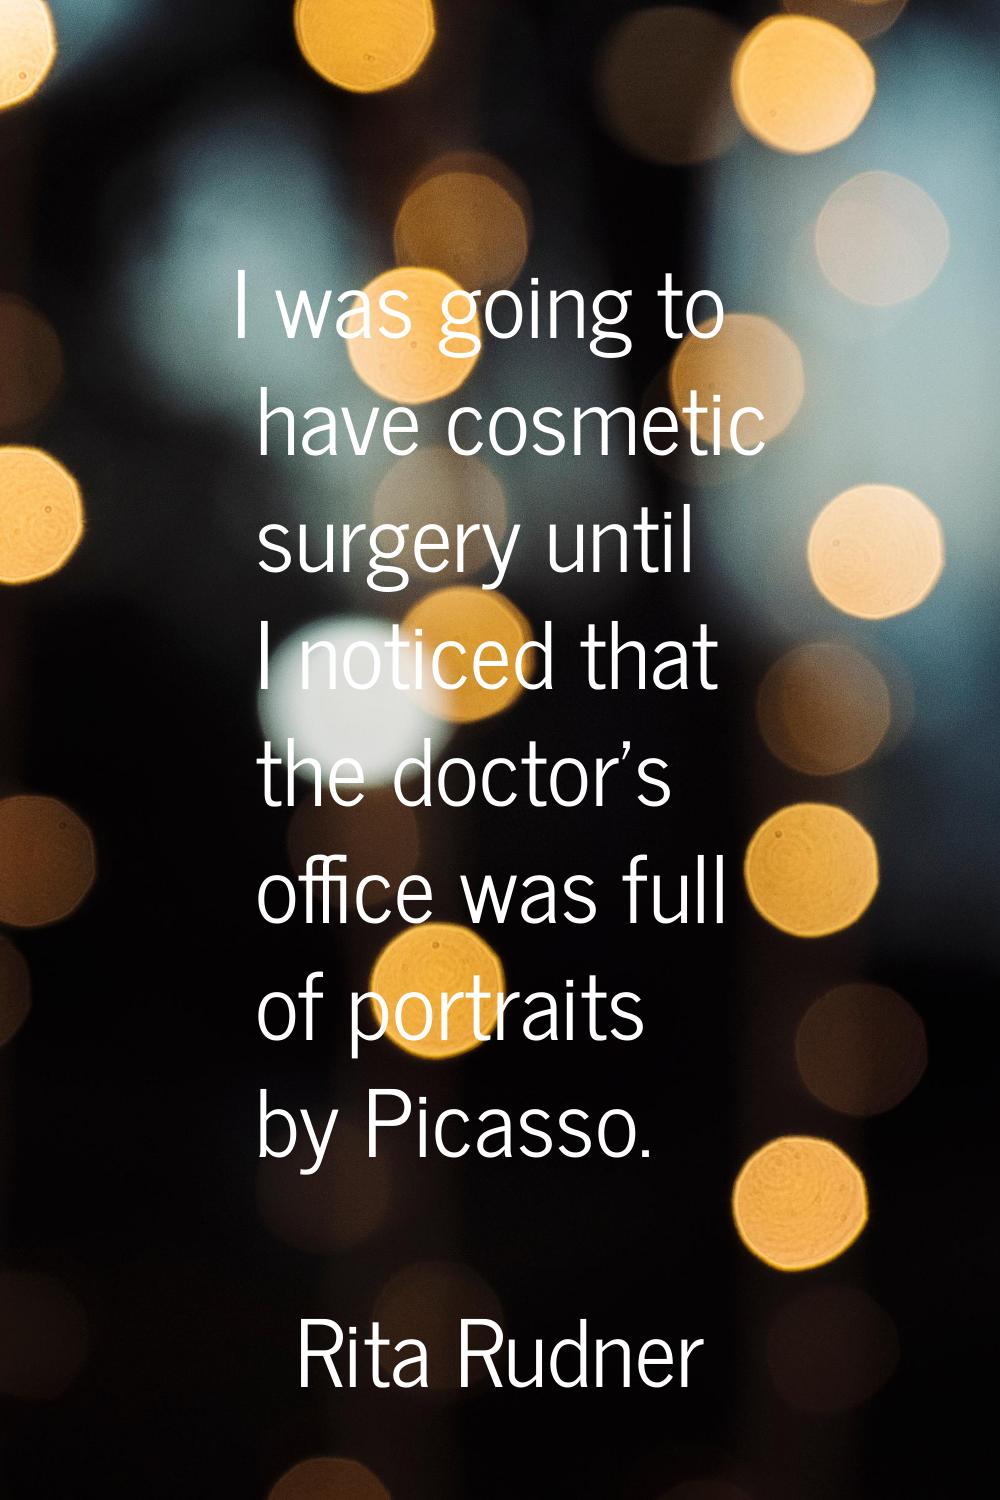 I was going to have cosmetic surgery until I noticed that the doctor's office was full of portraits